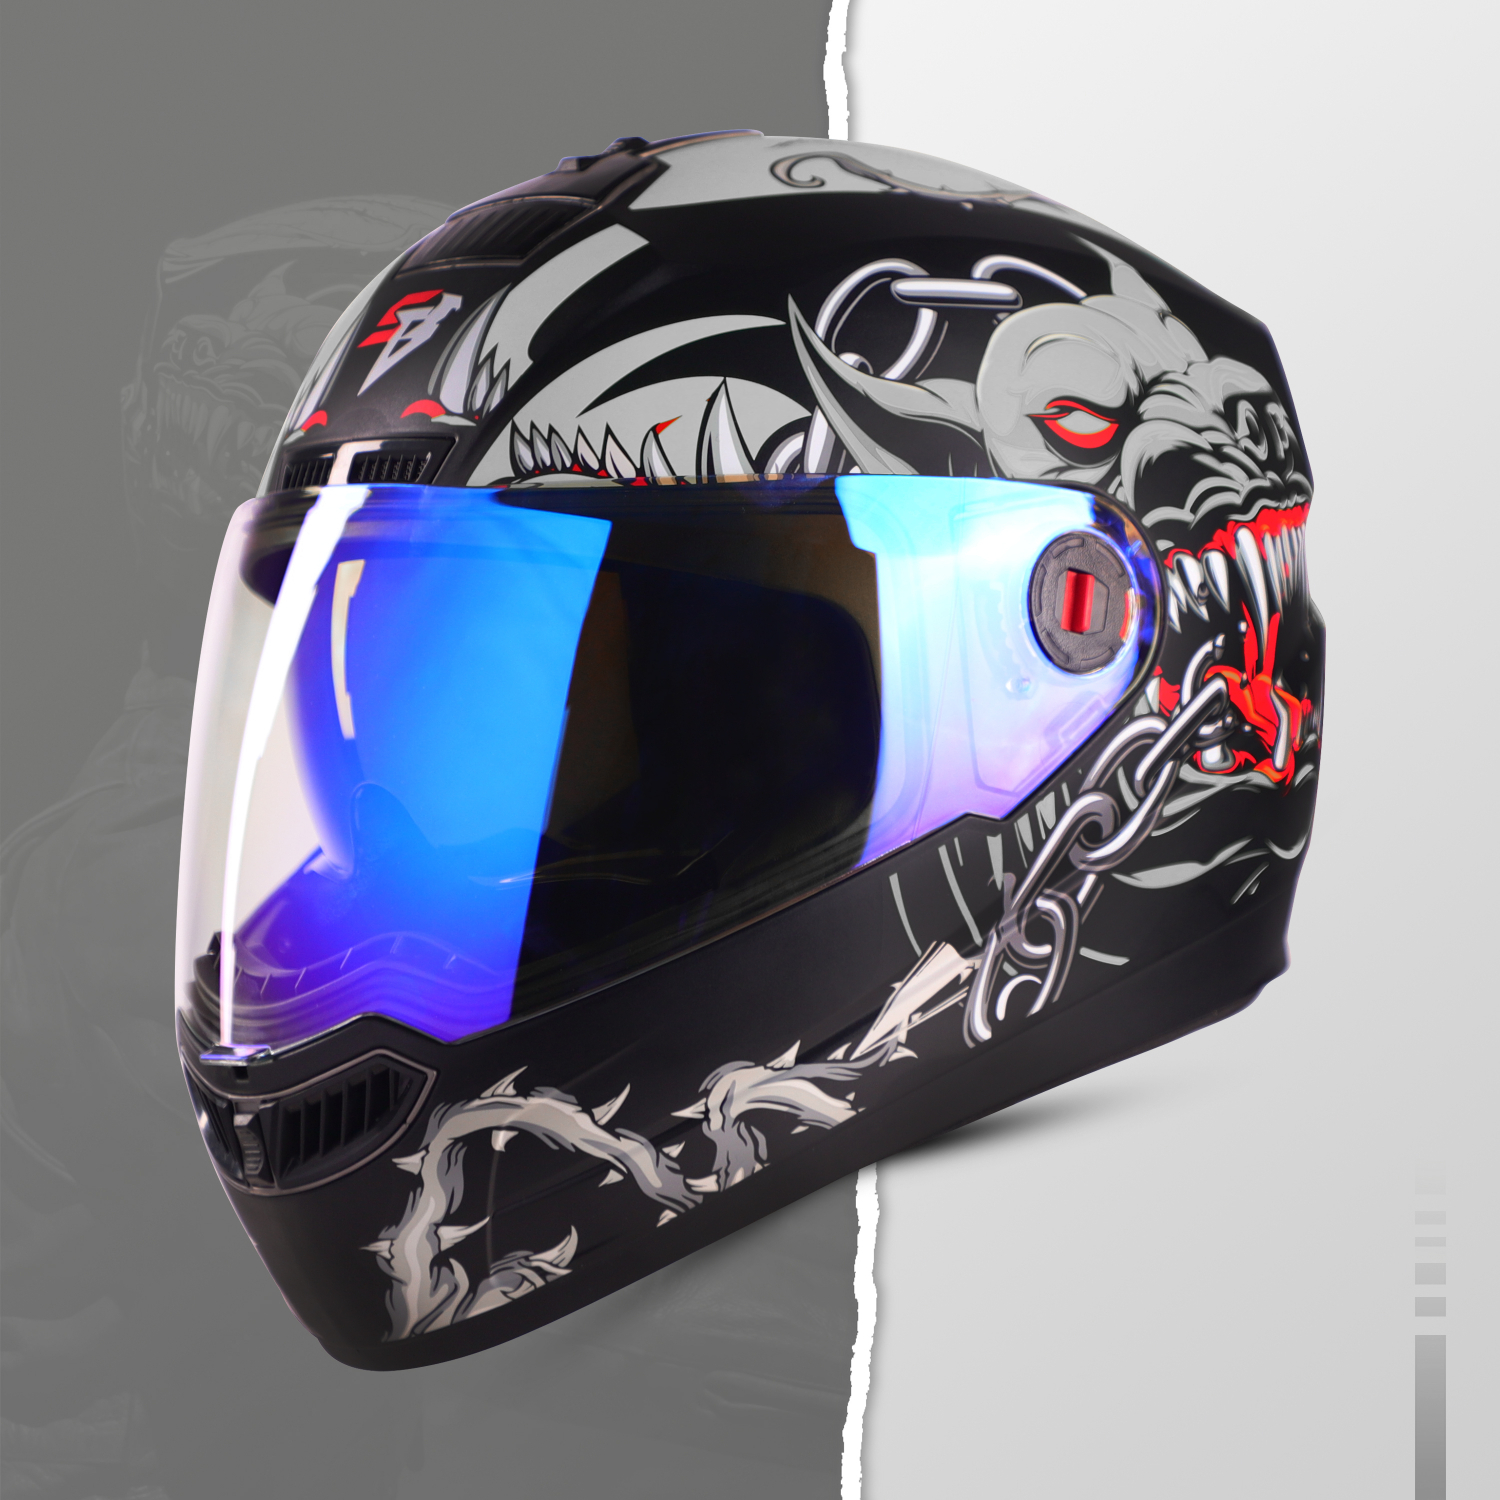 Steelbird SBA-1 Angry Dog ISI Certified Full Face Graphic Helmet For Men And Women With Inner Smoke Sun Shield (Matt Black Grey With Night Vision Blue Visor)